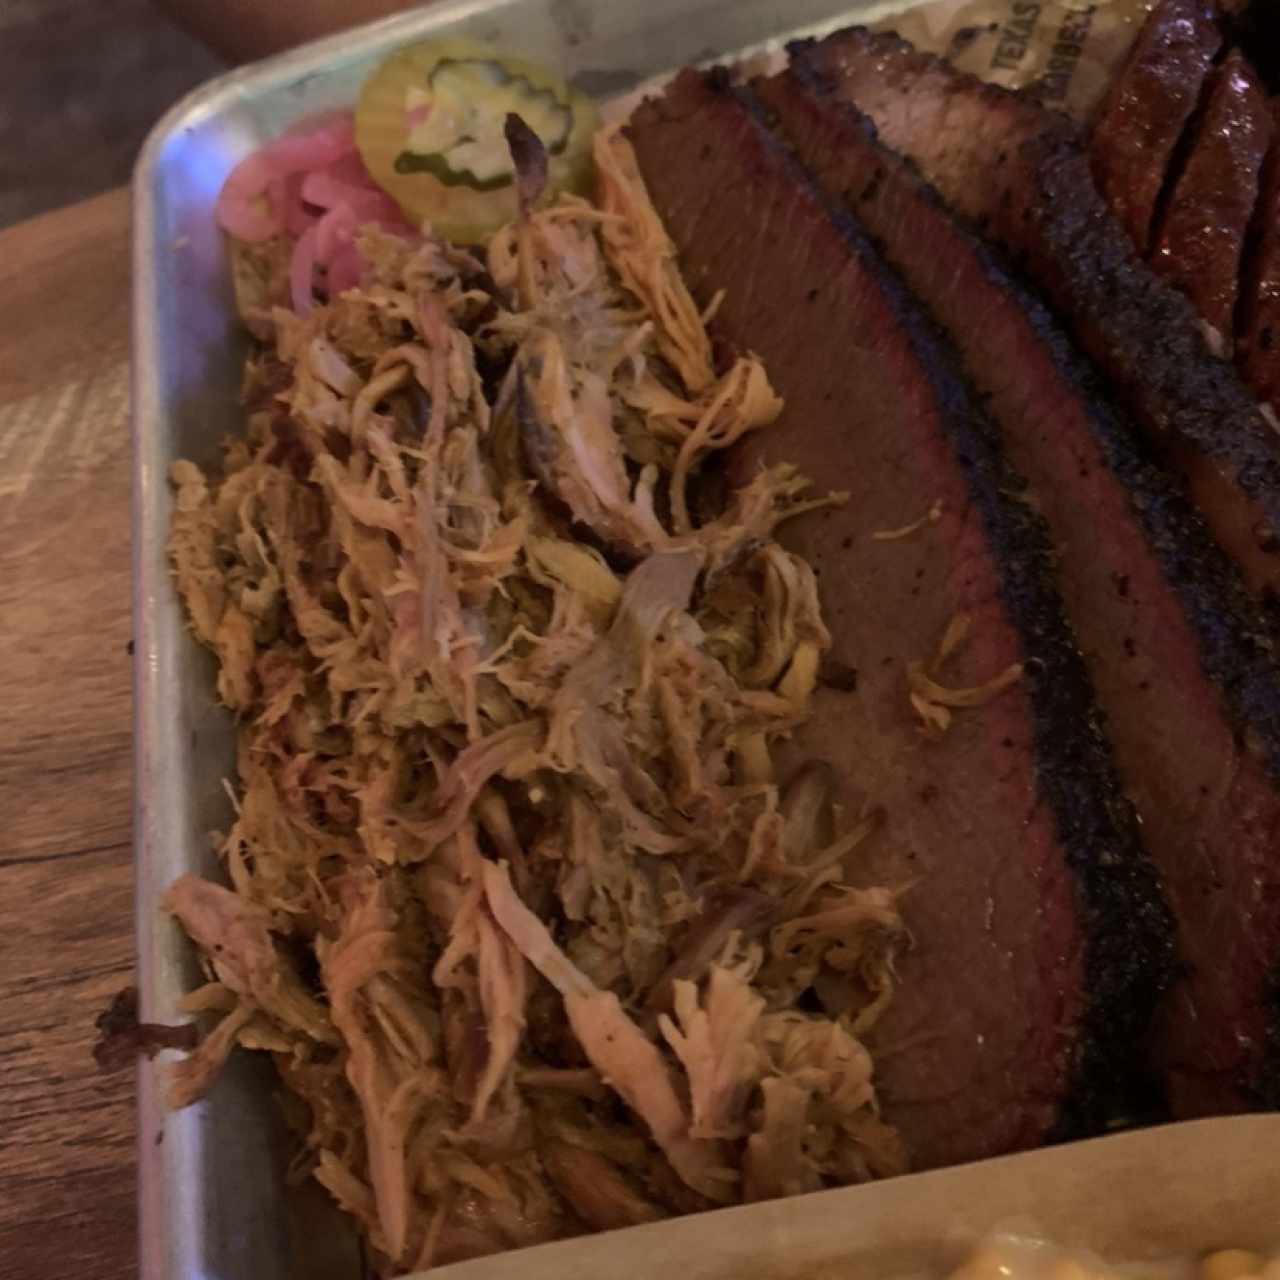 Smoked Meats - Pulled Pork 1/2